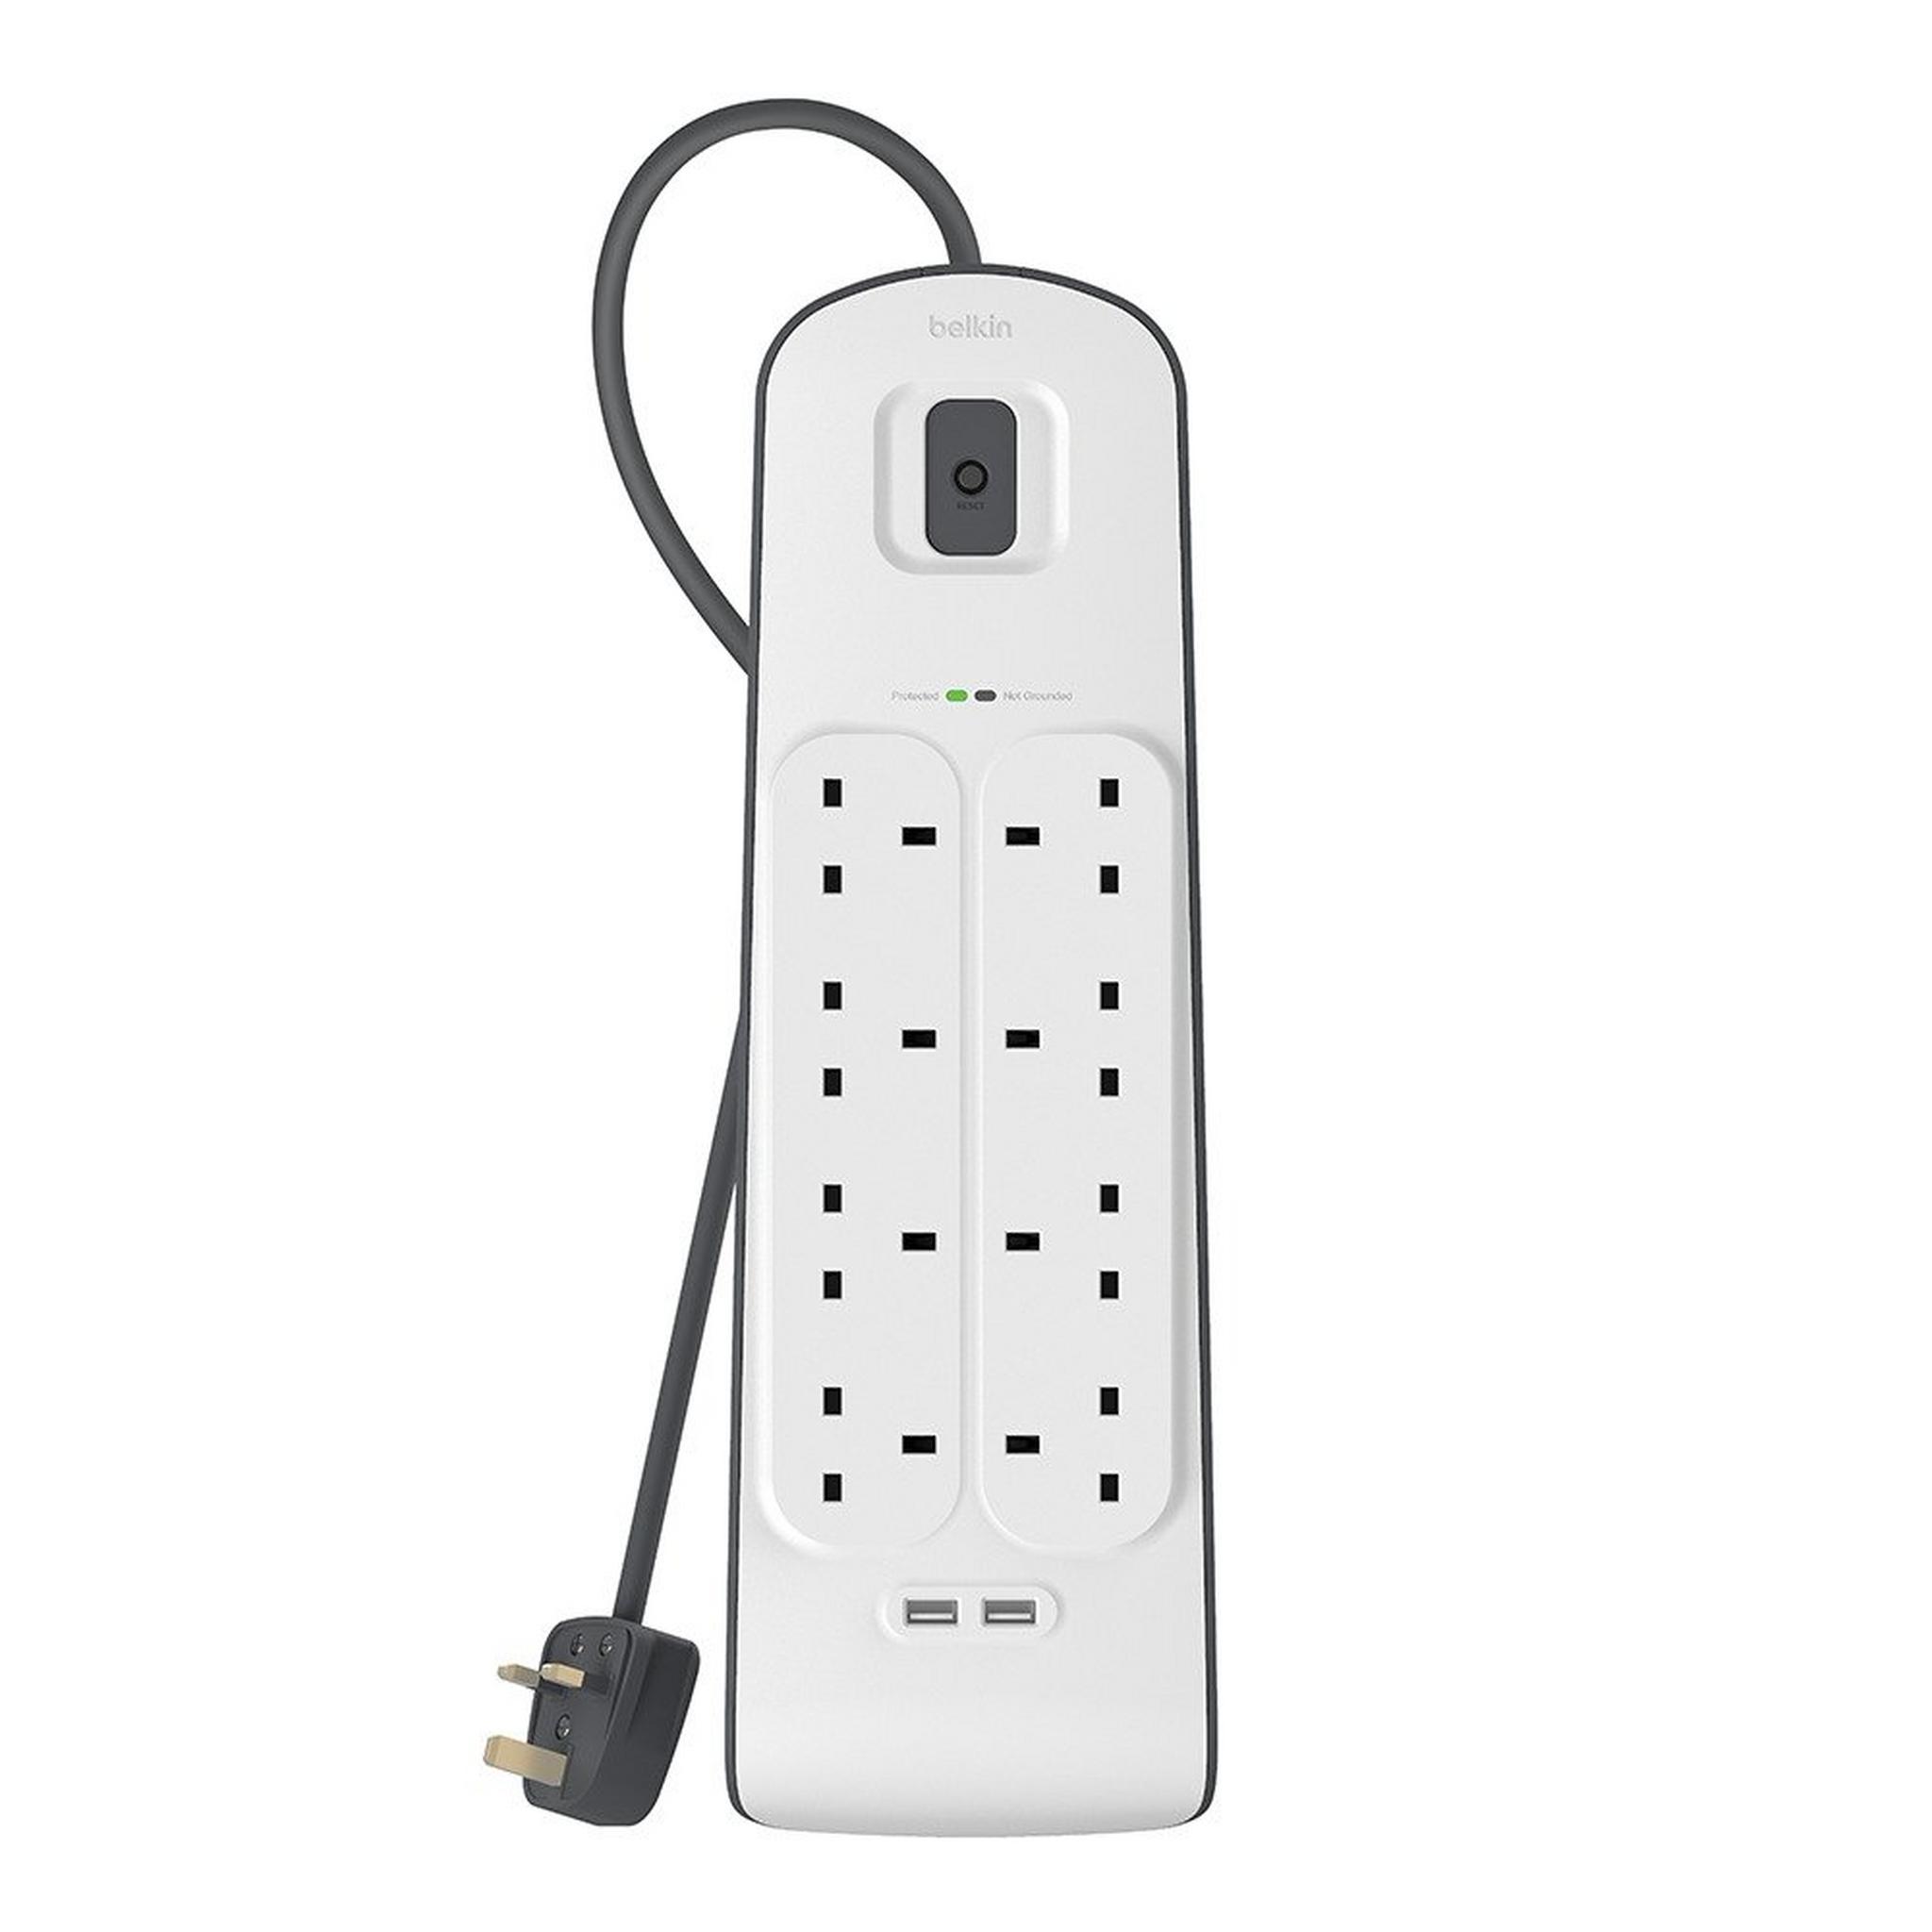 Belkin 2M 6 Way Surge Protection Strip with USB Charging BSV604AF2M